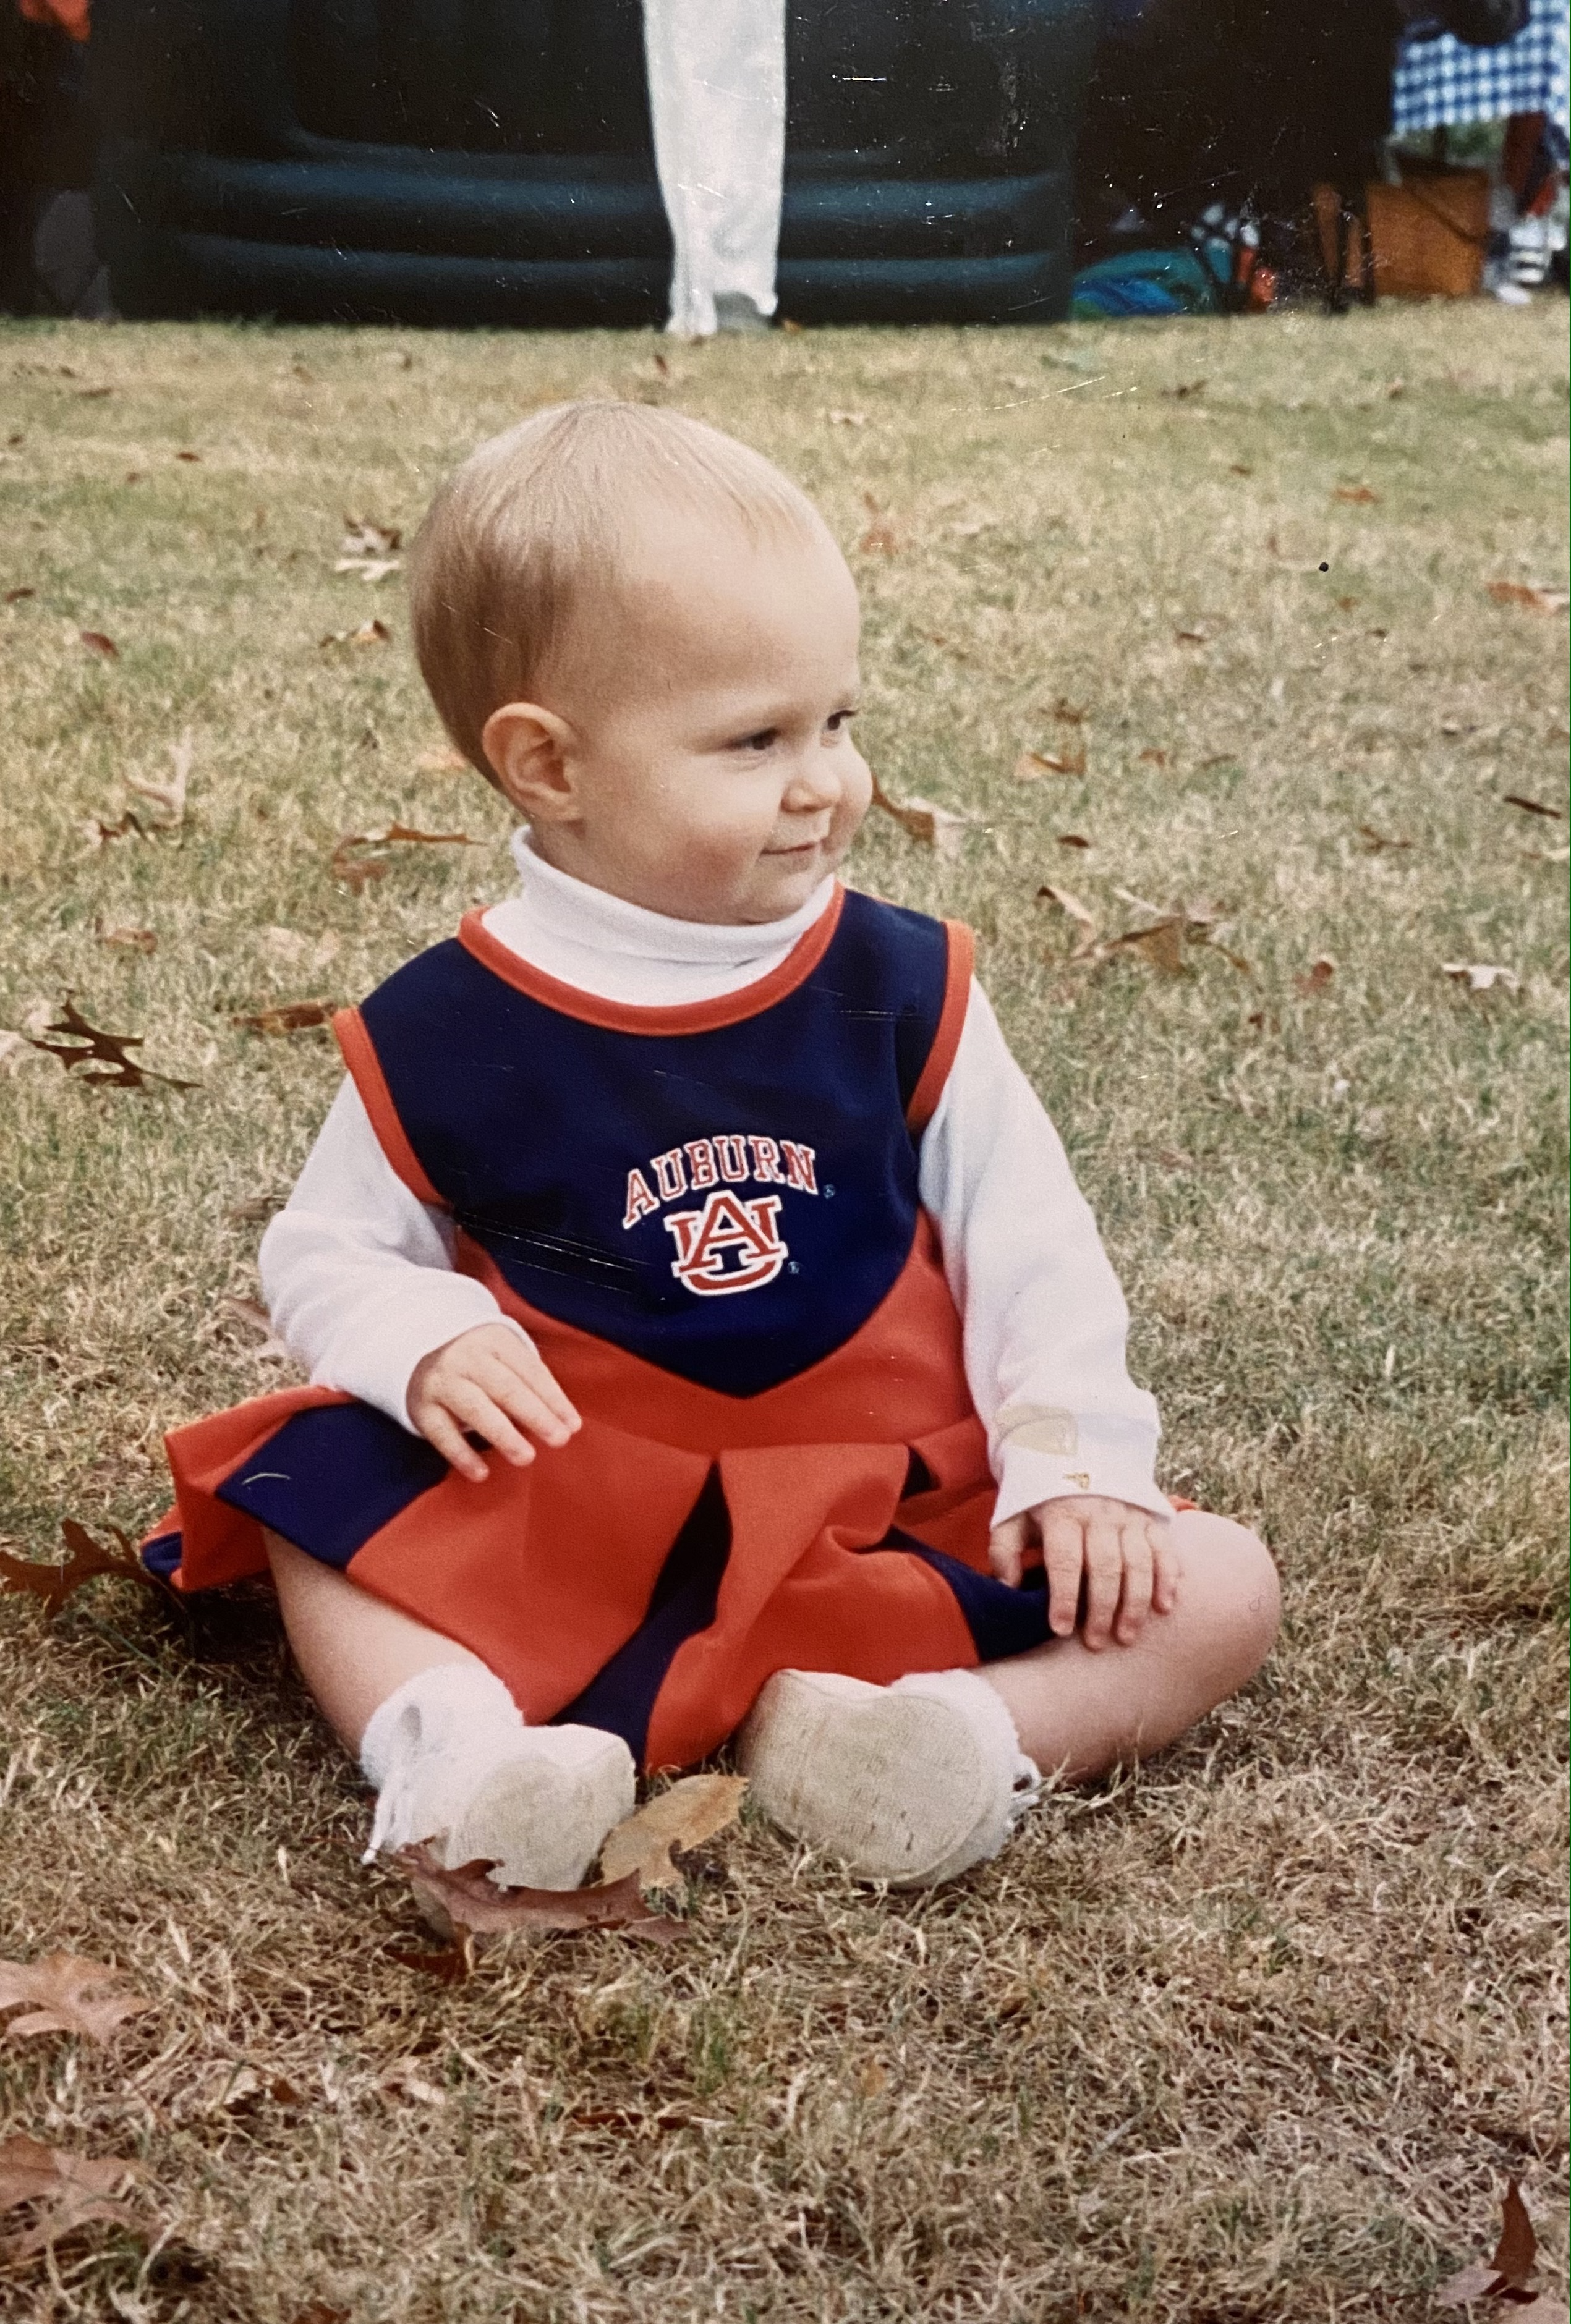 Kate was ready to cheer for Auburn as a child.